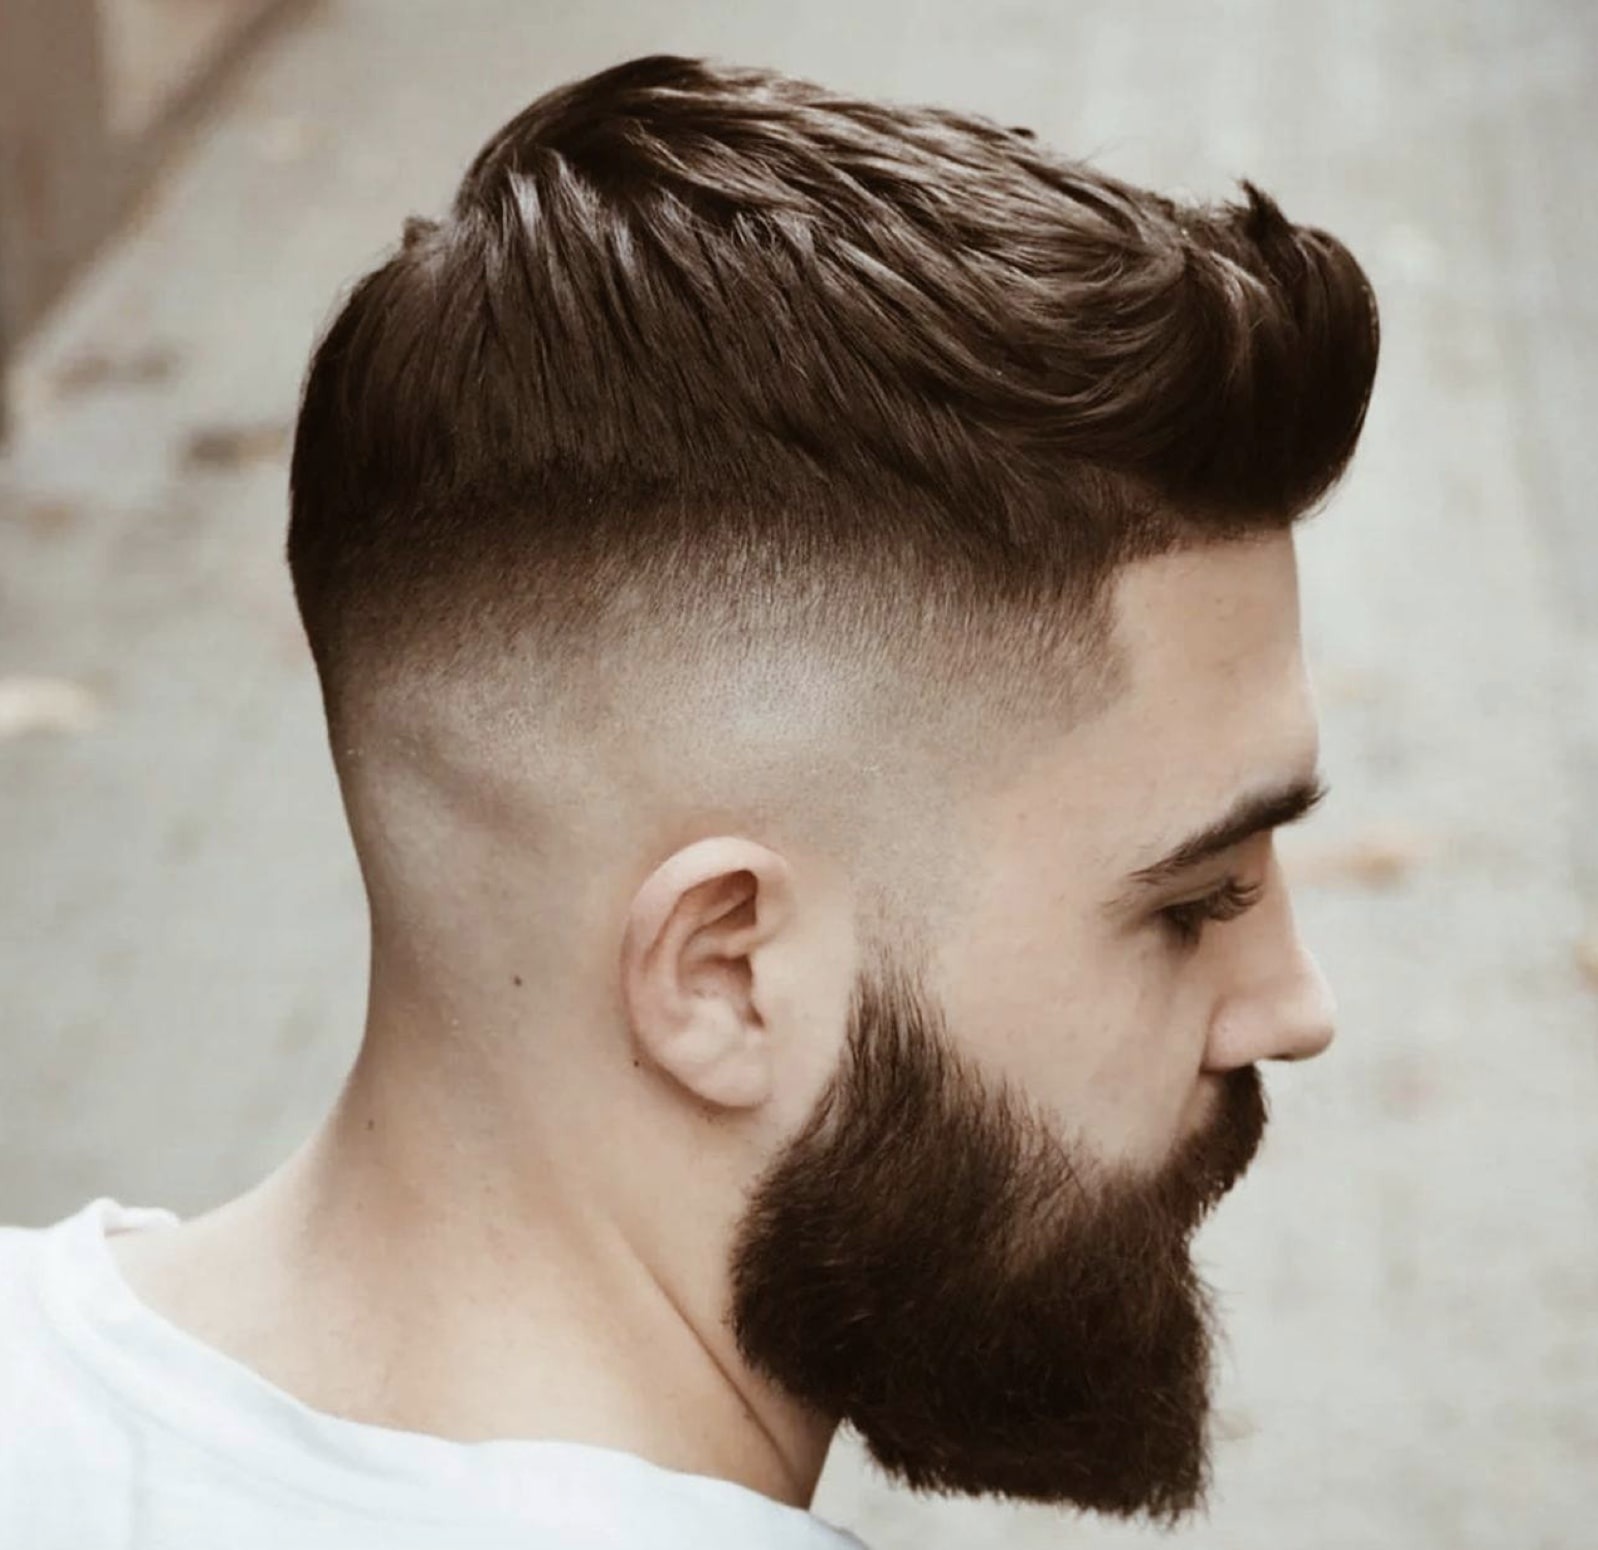 13 Best Hair Style Apps for Men (Android & iOS) | Freeappsforme - Free apps  for Android and iOS